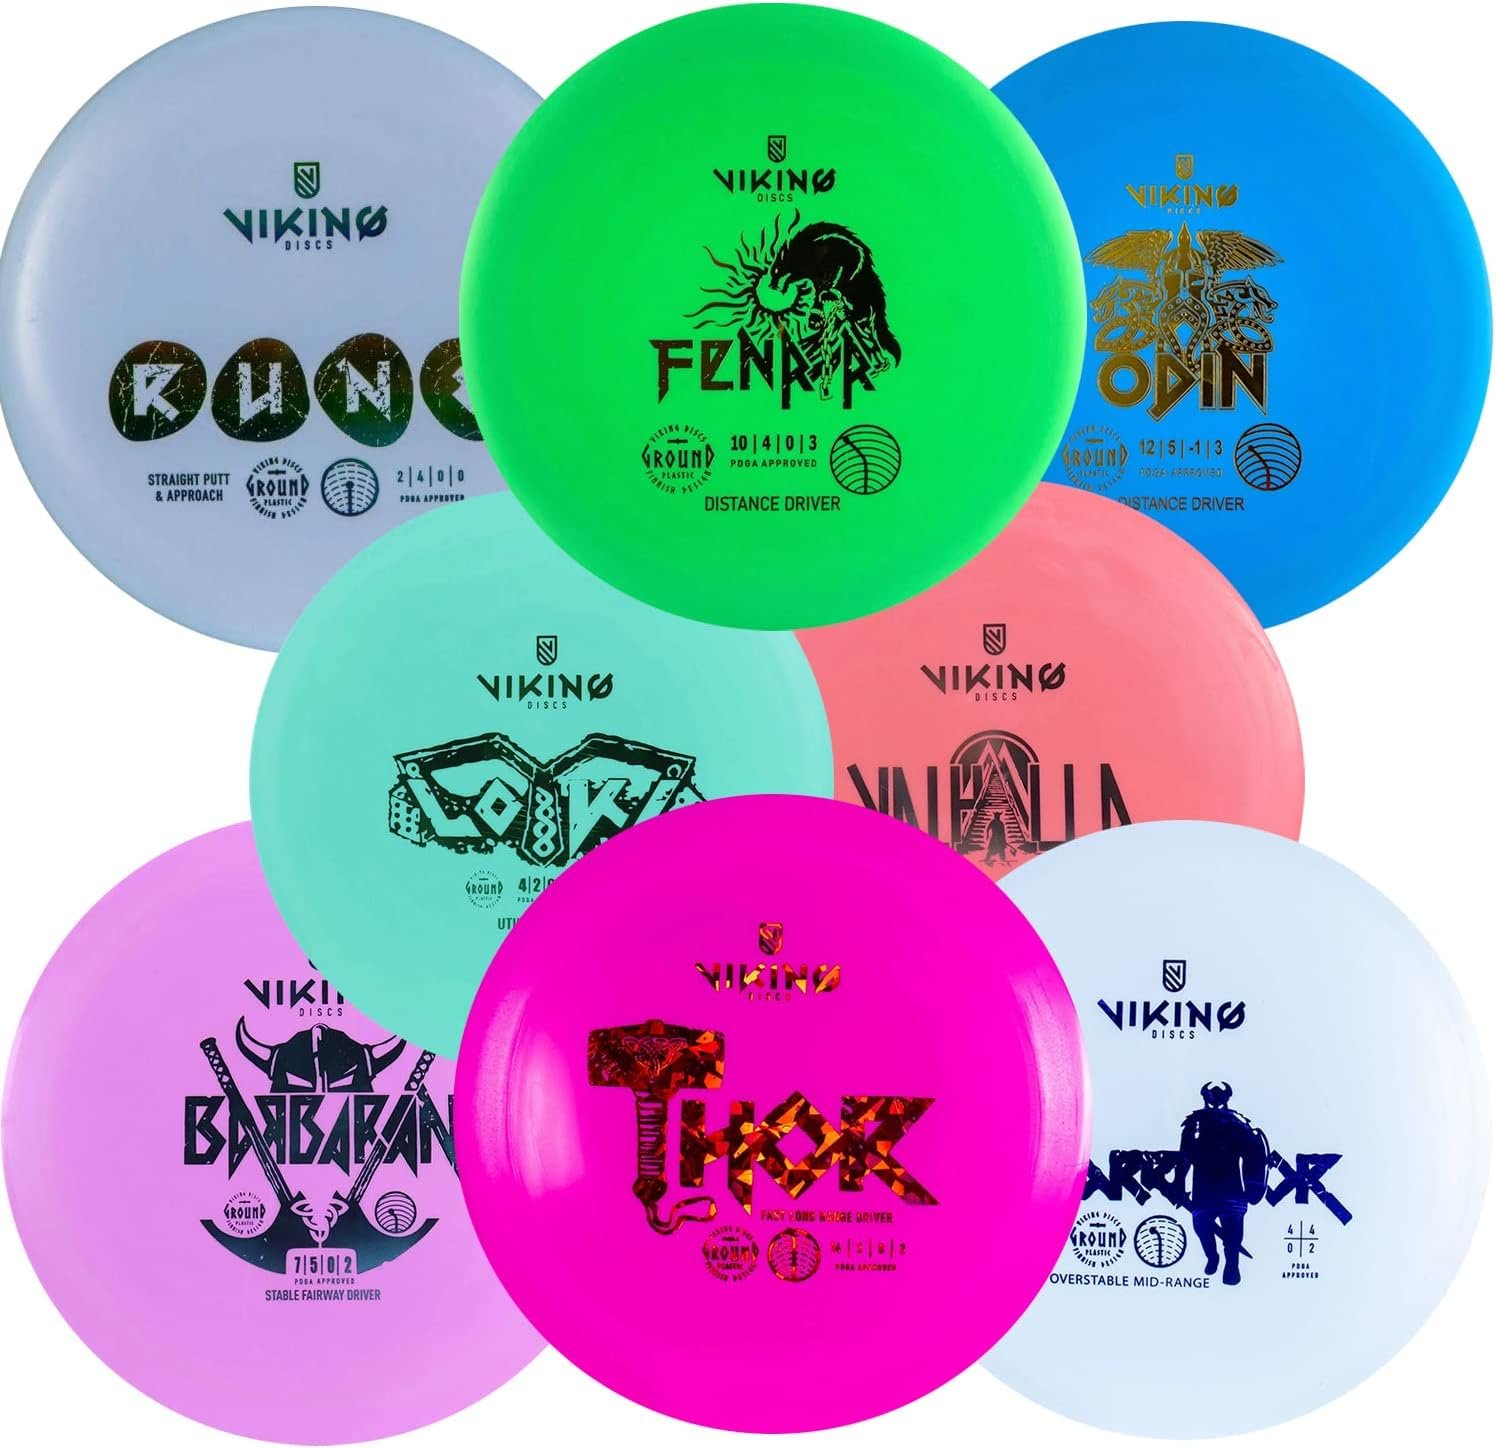 Viking Discs Original Disc Golf Set - 8 Frisbee Discs for Any Distance, PDGA Approved - Putter, Mid-Range, Fairway Driver, Distance Driver – Frisbee Golf Discs Set for Beginners and Professionals